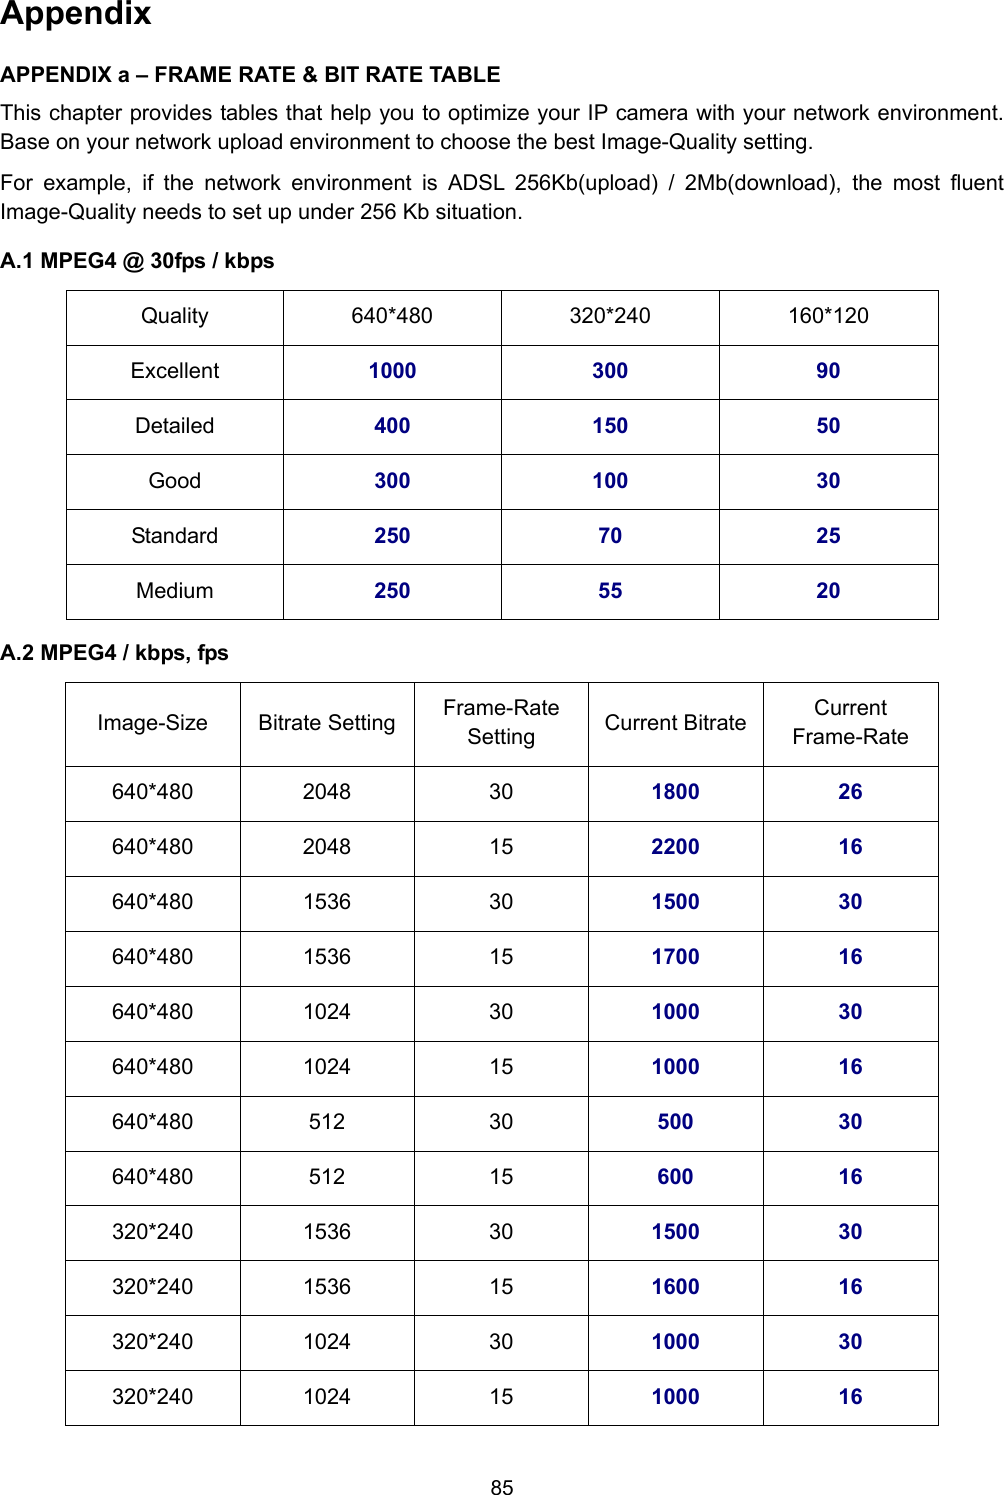 85 Appendix APPENDIX a – FRAME RATE &amp; BIT RATE TABLE This chapter provides tables that help you to optimize your IP camera with your network environment. Base on your network upload environment to choose the best Image-Quality setting. For example, if the network environment is ADSL 256Kb(upload) / 2Mb(download), the most fluent Image-Quality needs to set up under 256 Kb situation. A.1 MPEG4 @ 30fps / kbps Quality 640*480 320*240 160*120 Excellent  1000 300  90 Detailed  400 150  50 Good  300 100  30 Standard  250 70  25 Medium  250 55  20 A.2 MPEG4 / kbps, fps Image-Size Bitrate Setting Frame-Rate Setting  Current Bitrate Current Frame-Rate 640*480 2048  30  1800 26 640*480 2048  15  2200 16 640*480 1536  30  1500 30 640*480 1536  15  1700 16 640*480 1024  30  1000 30 640*480 1024  15  1000 16 640*480 512  30  500 30 640*480 512  15  600 16 320*240 1536  30  1500 30 320*240 1536  15  1600 16 320*240 1024  30  1000 30 320*240 1024  15  1000 16 